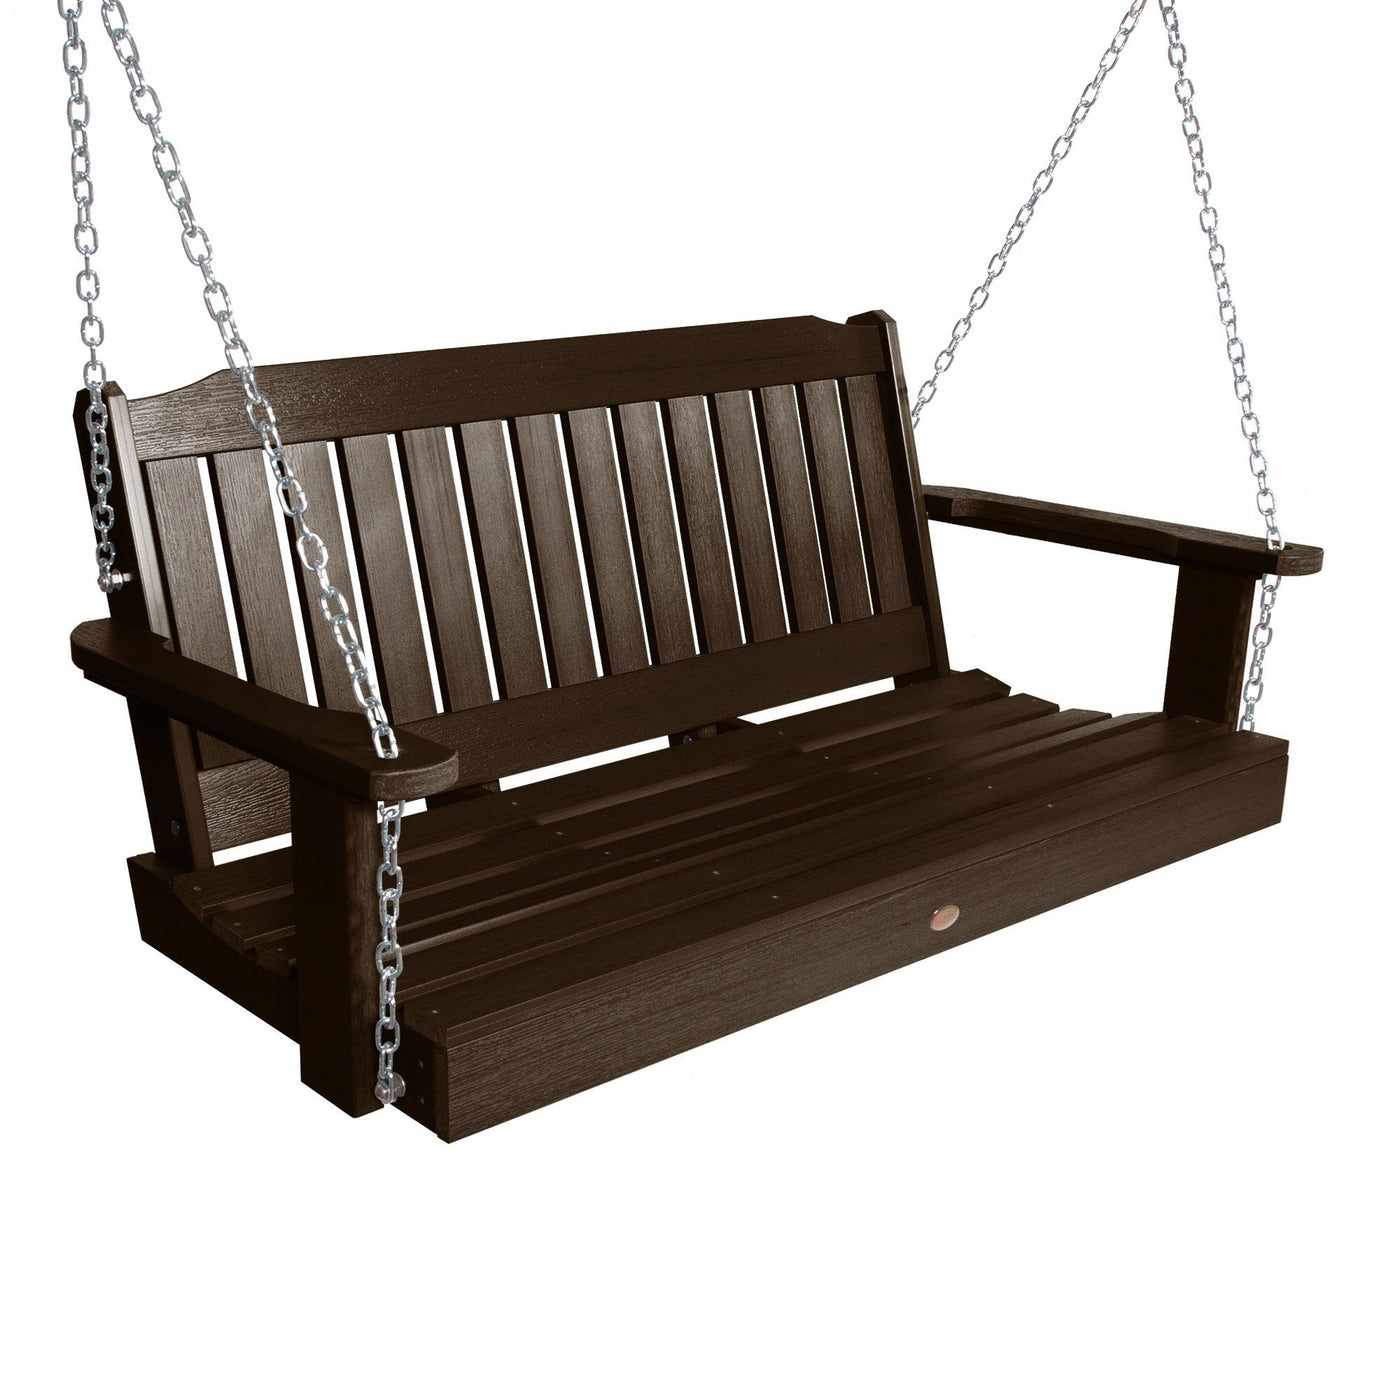 Lehigh Porch Swing - 4ft BenchSwing Highwood USA Weathered Acorn 